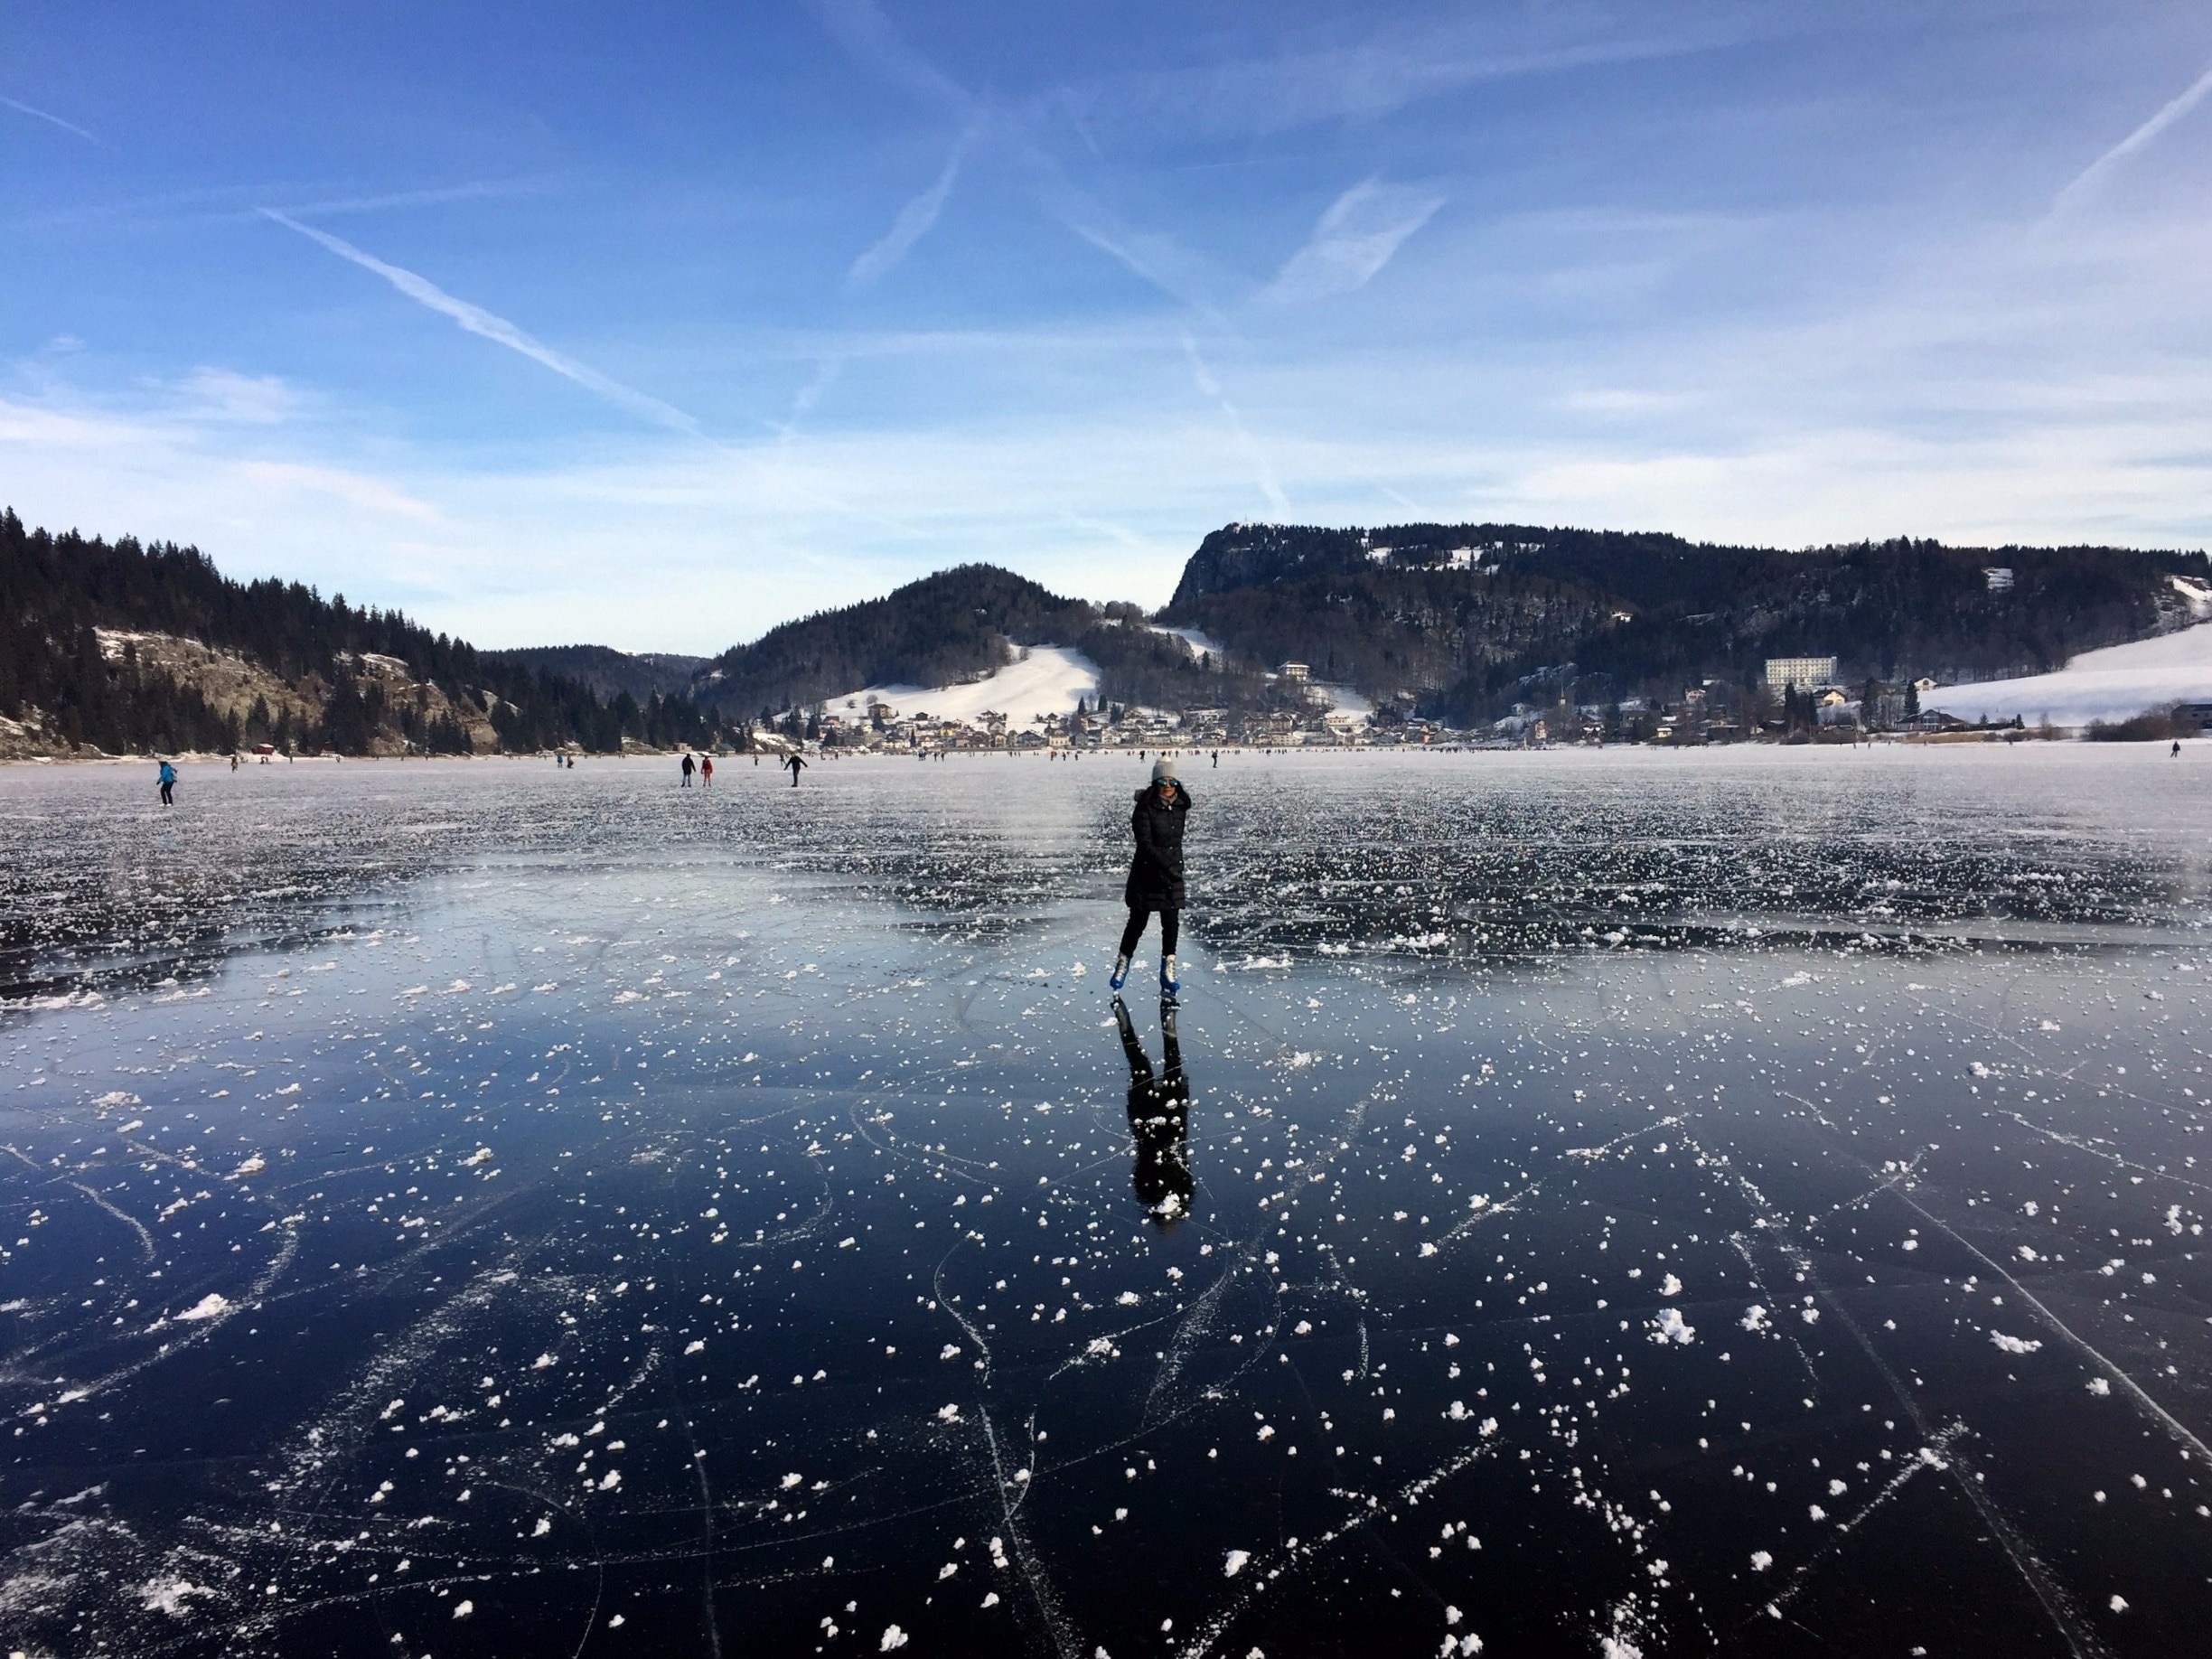 #IceSkating on an 8km #frozen #lake anyone?
You'll need a bit of luck, as this year was the first time in 4 that the lac de #Joux completely froze. The Joux area is a beautiful place to visit in winter, with multiple #nordic #ski opportunities. In summer, Hike round the lake, or up in the nearby mountains. #lifeatExpedia 